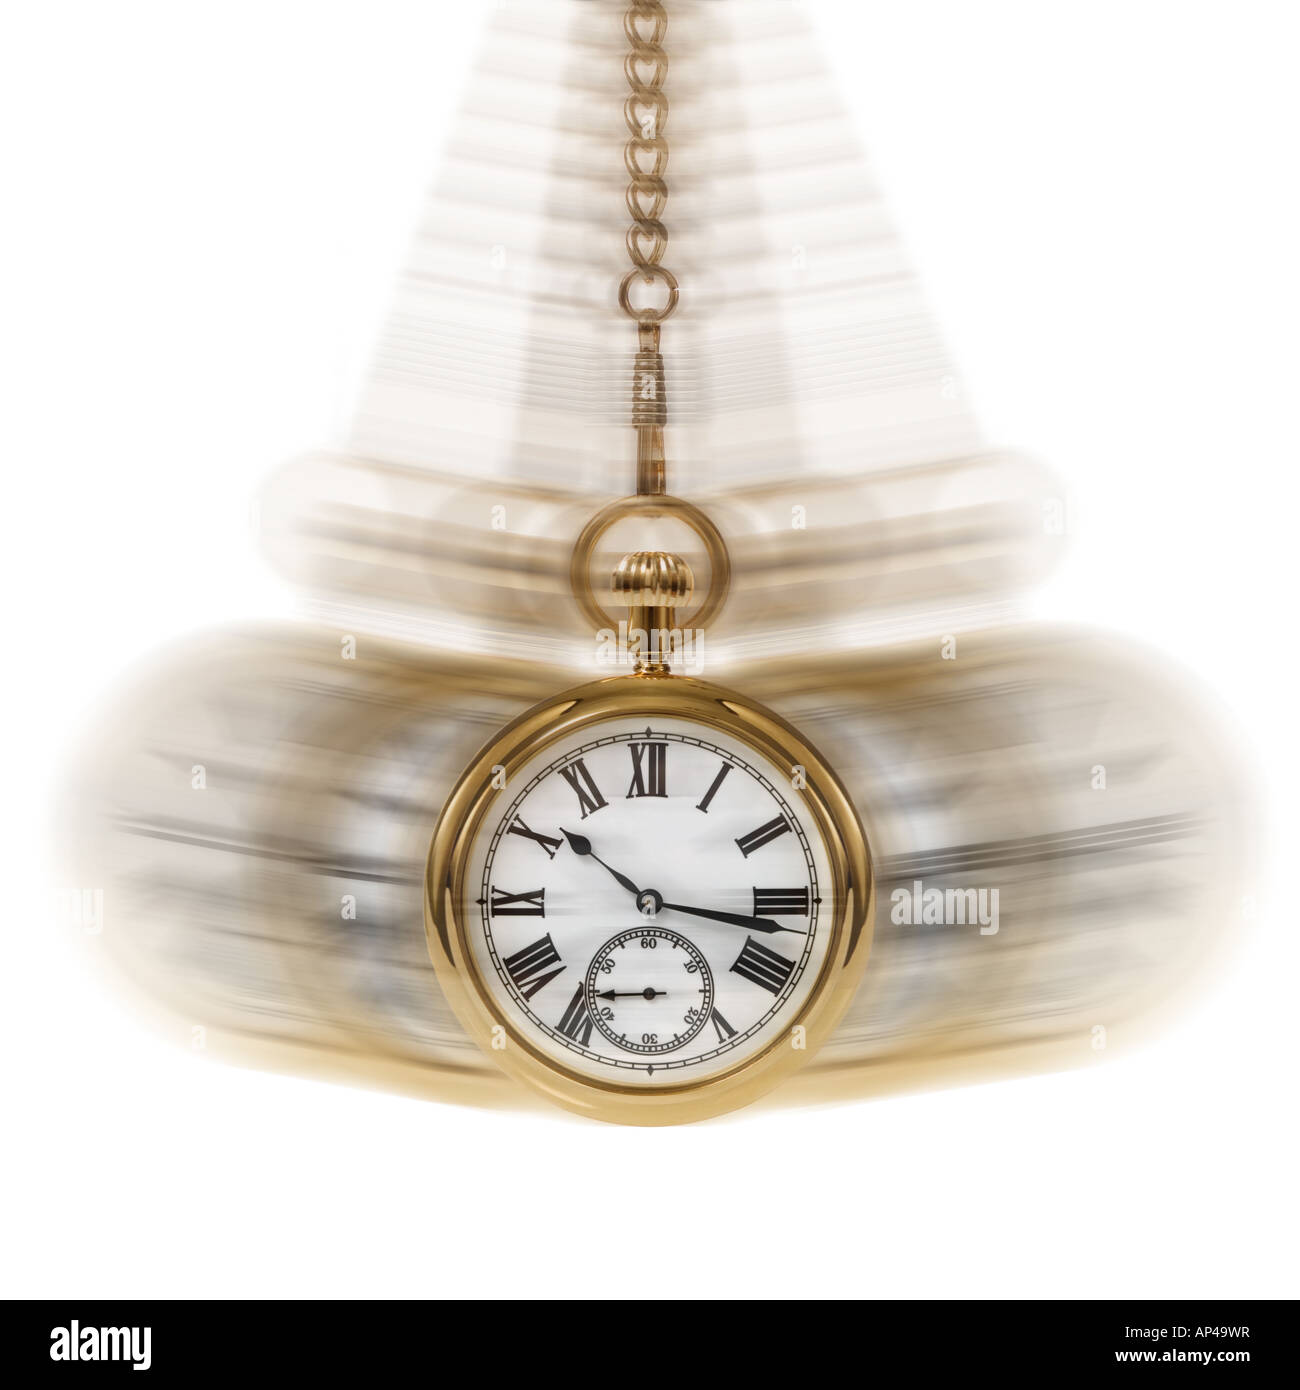 Concept image depicting Time and Motion on a white background Stock Photo